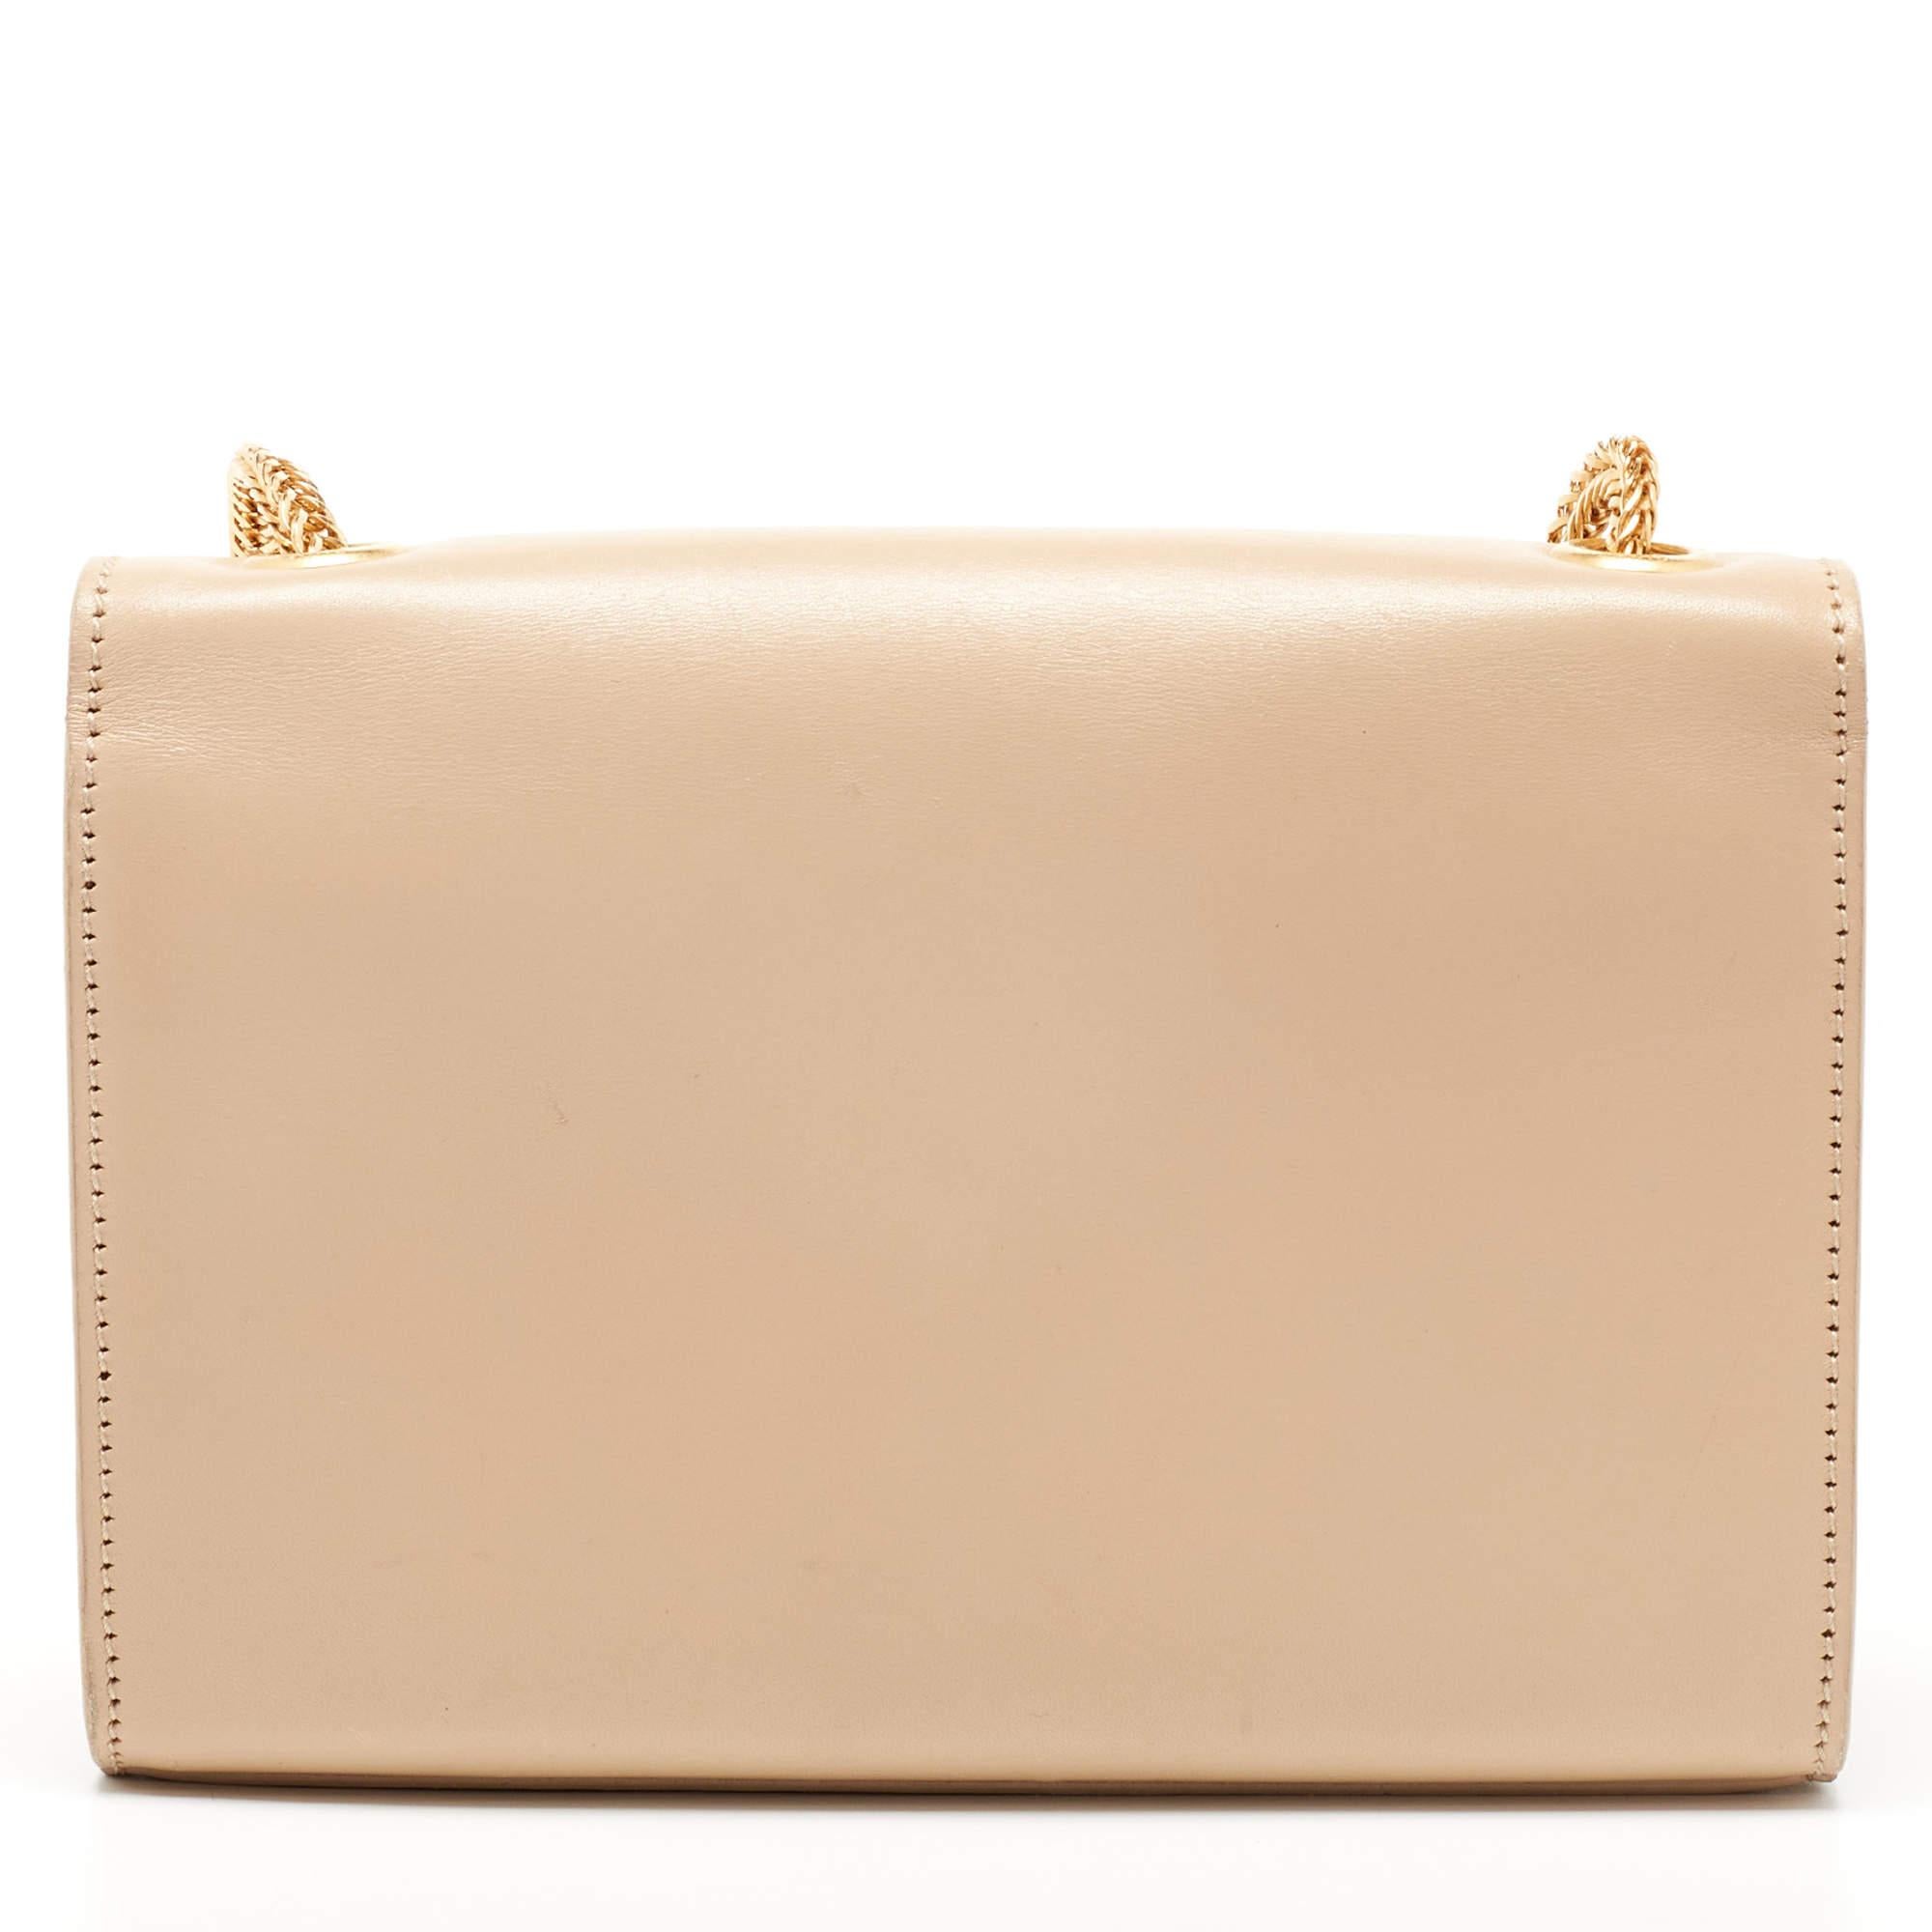 A charming companion for your next evening party, this Saint Laurent Kate bag is a well-crafted design. It can be carried around easily with a chain link and gets a luxe update with the brand signature on the front. Created from beige leather, it is